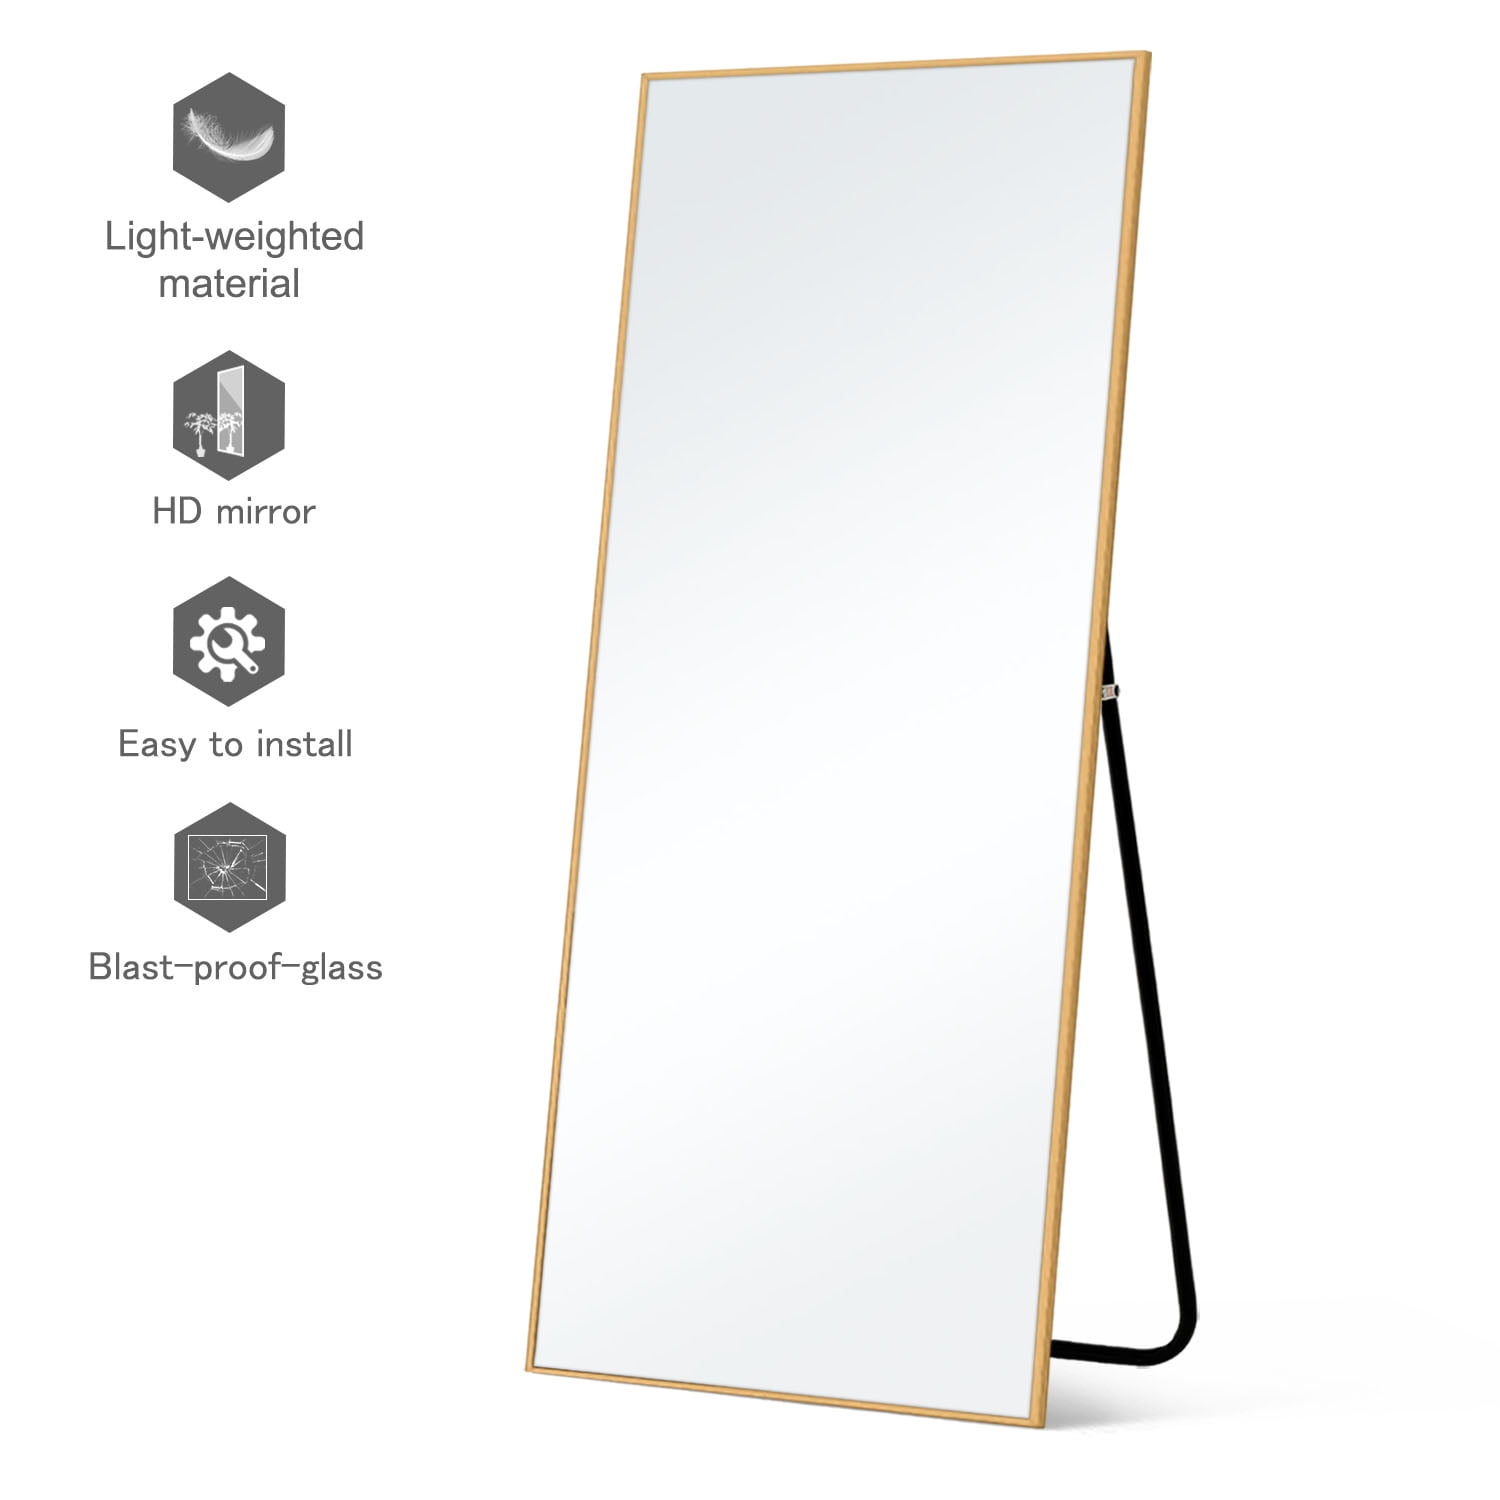 NeuType Oversized Floor Mirror Full Length Mirror with Stand Large Wall  Mounted Mirror Aluminum Alloy Frame (Black, 71 x 32) 